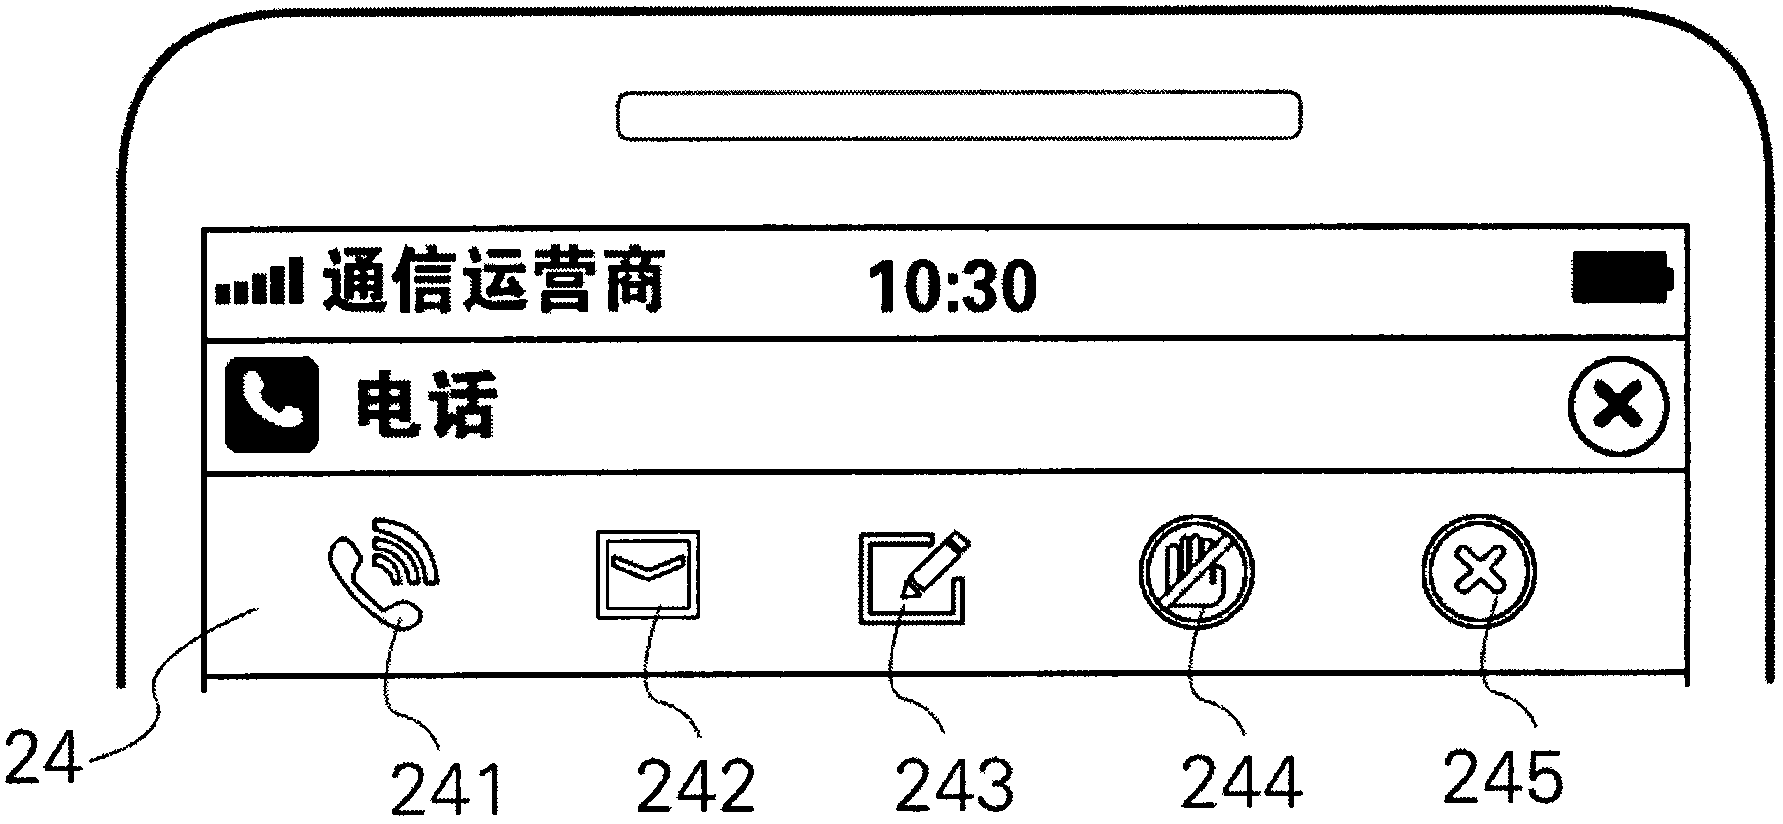 Method and graphical user interface for processing messages rapidly in intelligent device notification bar